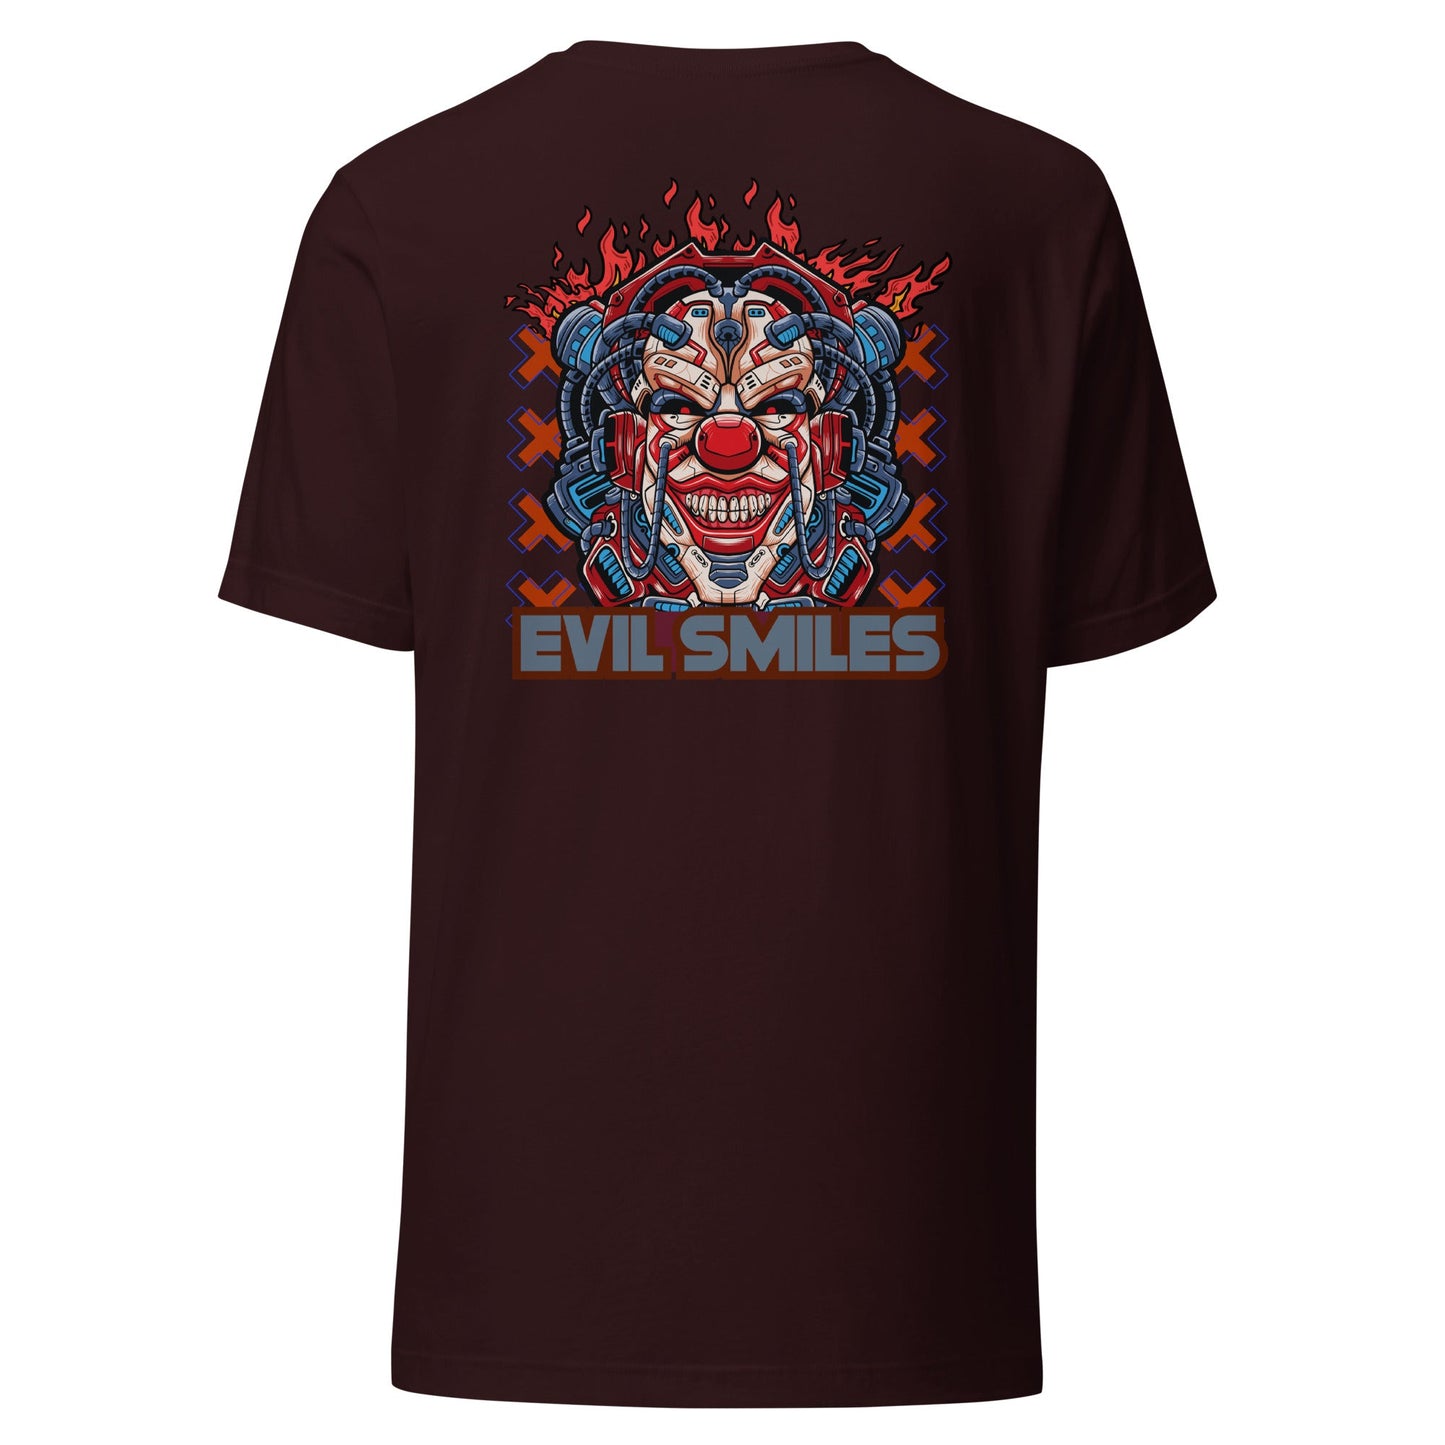 Sinister Grin Clown Tee | Evil Smile Circus T-Shirt | Playful & Mysterious | Unisex